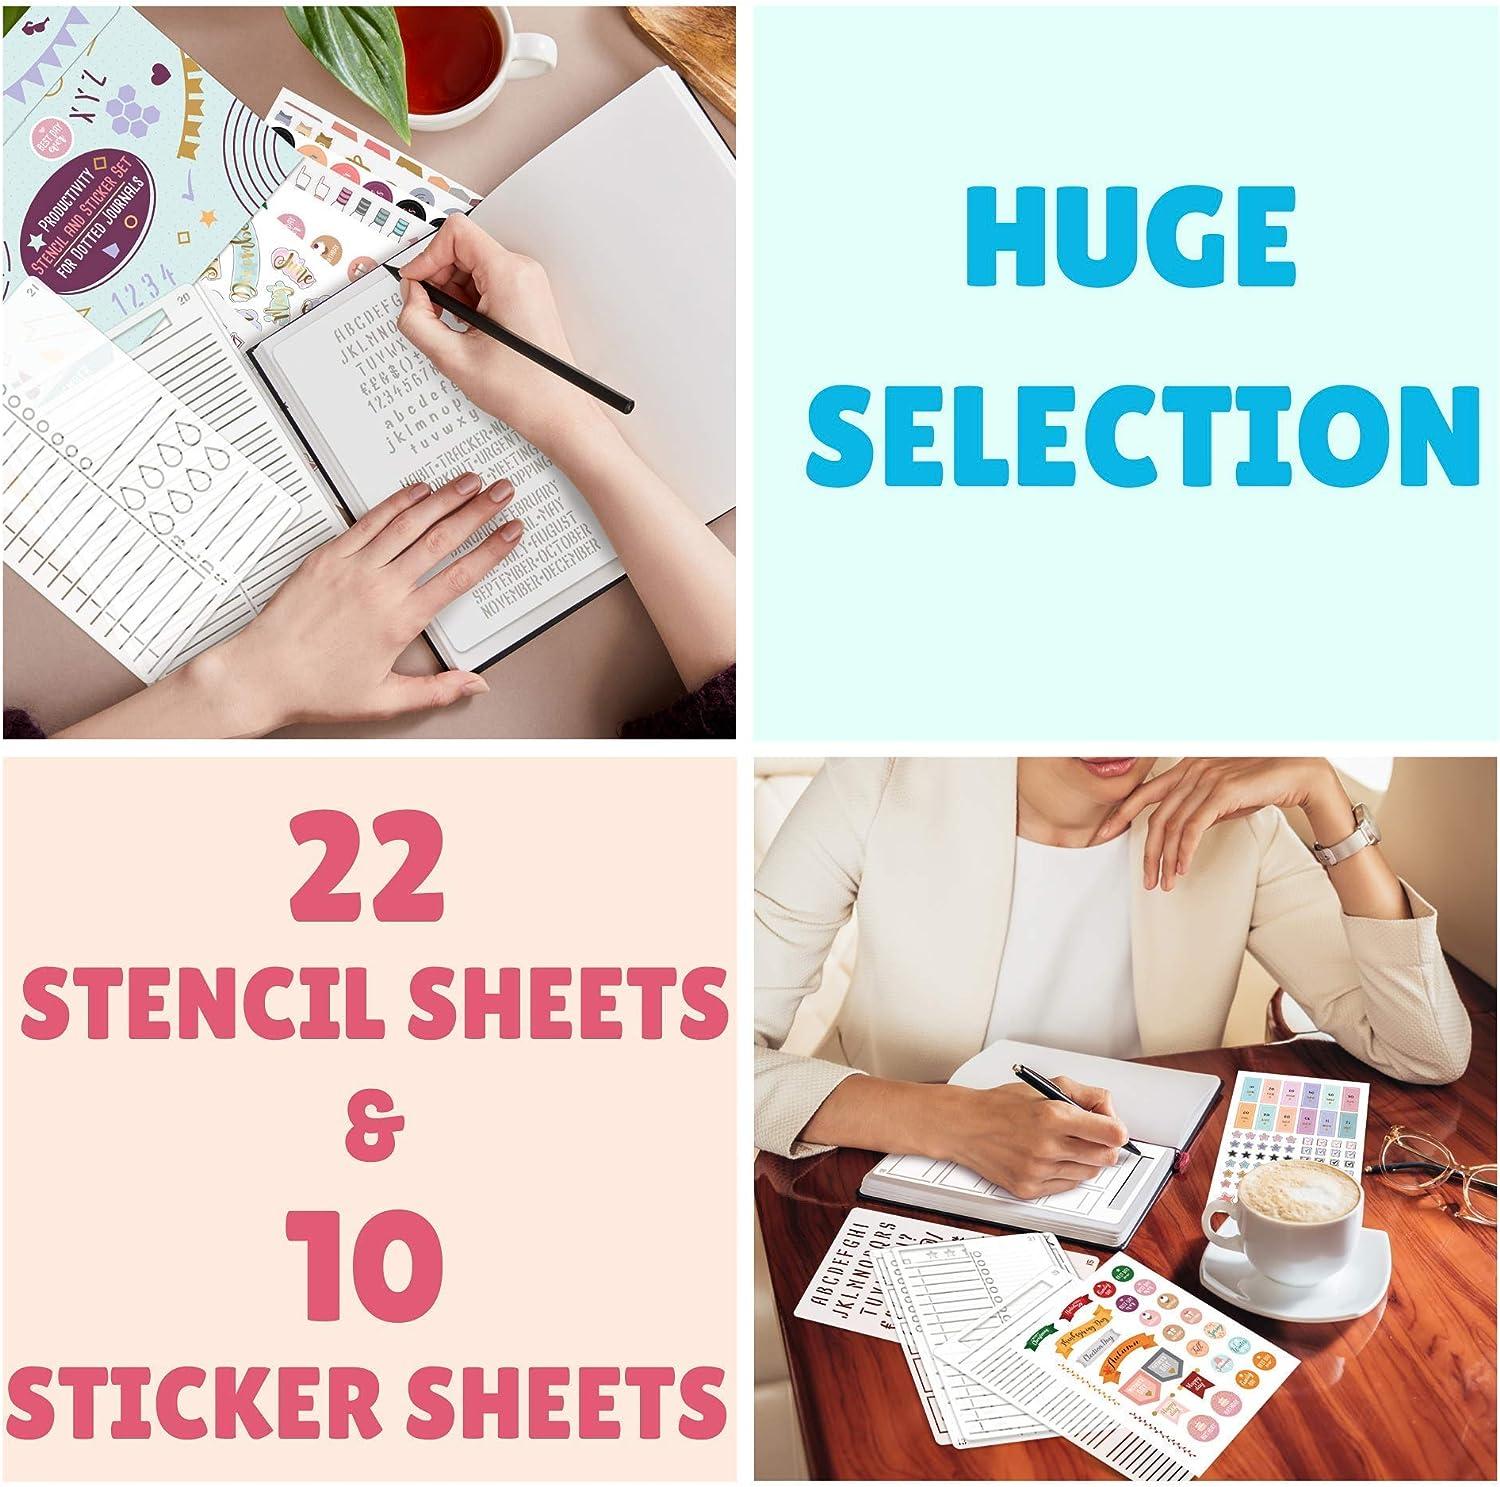 The Happy Planner Journaling Stencils - Shop Planners & Calendars